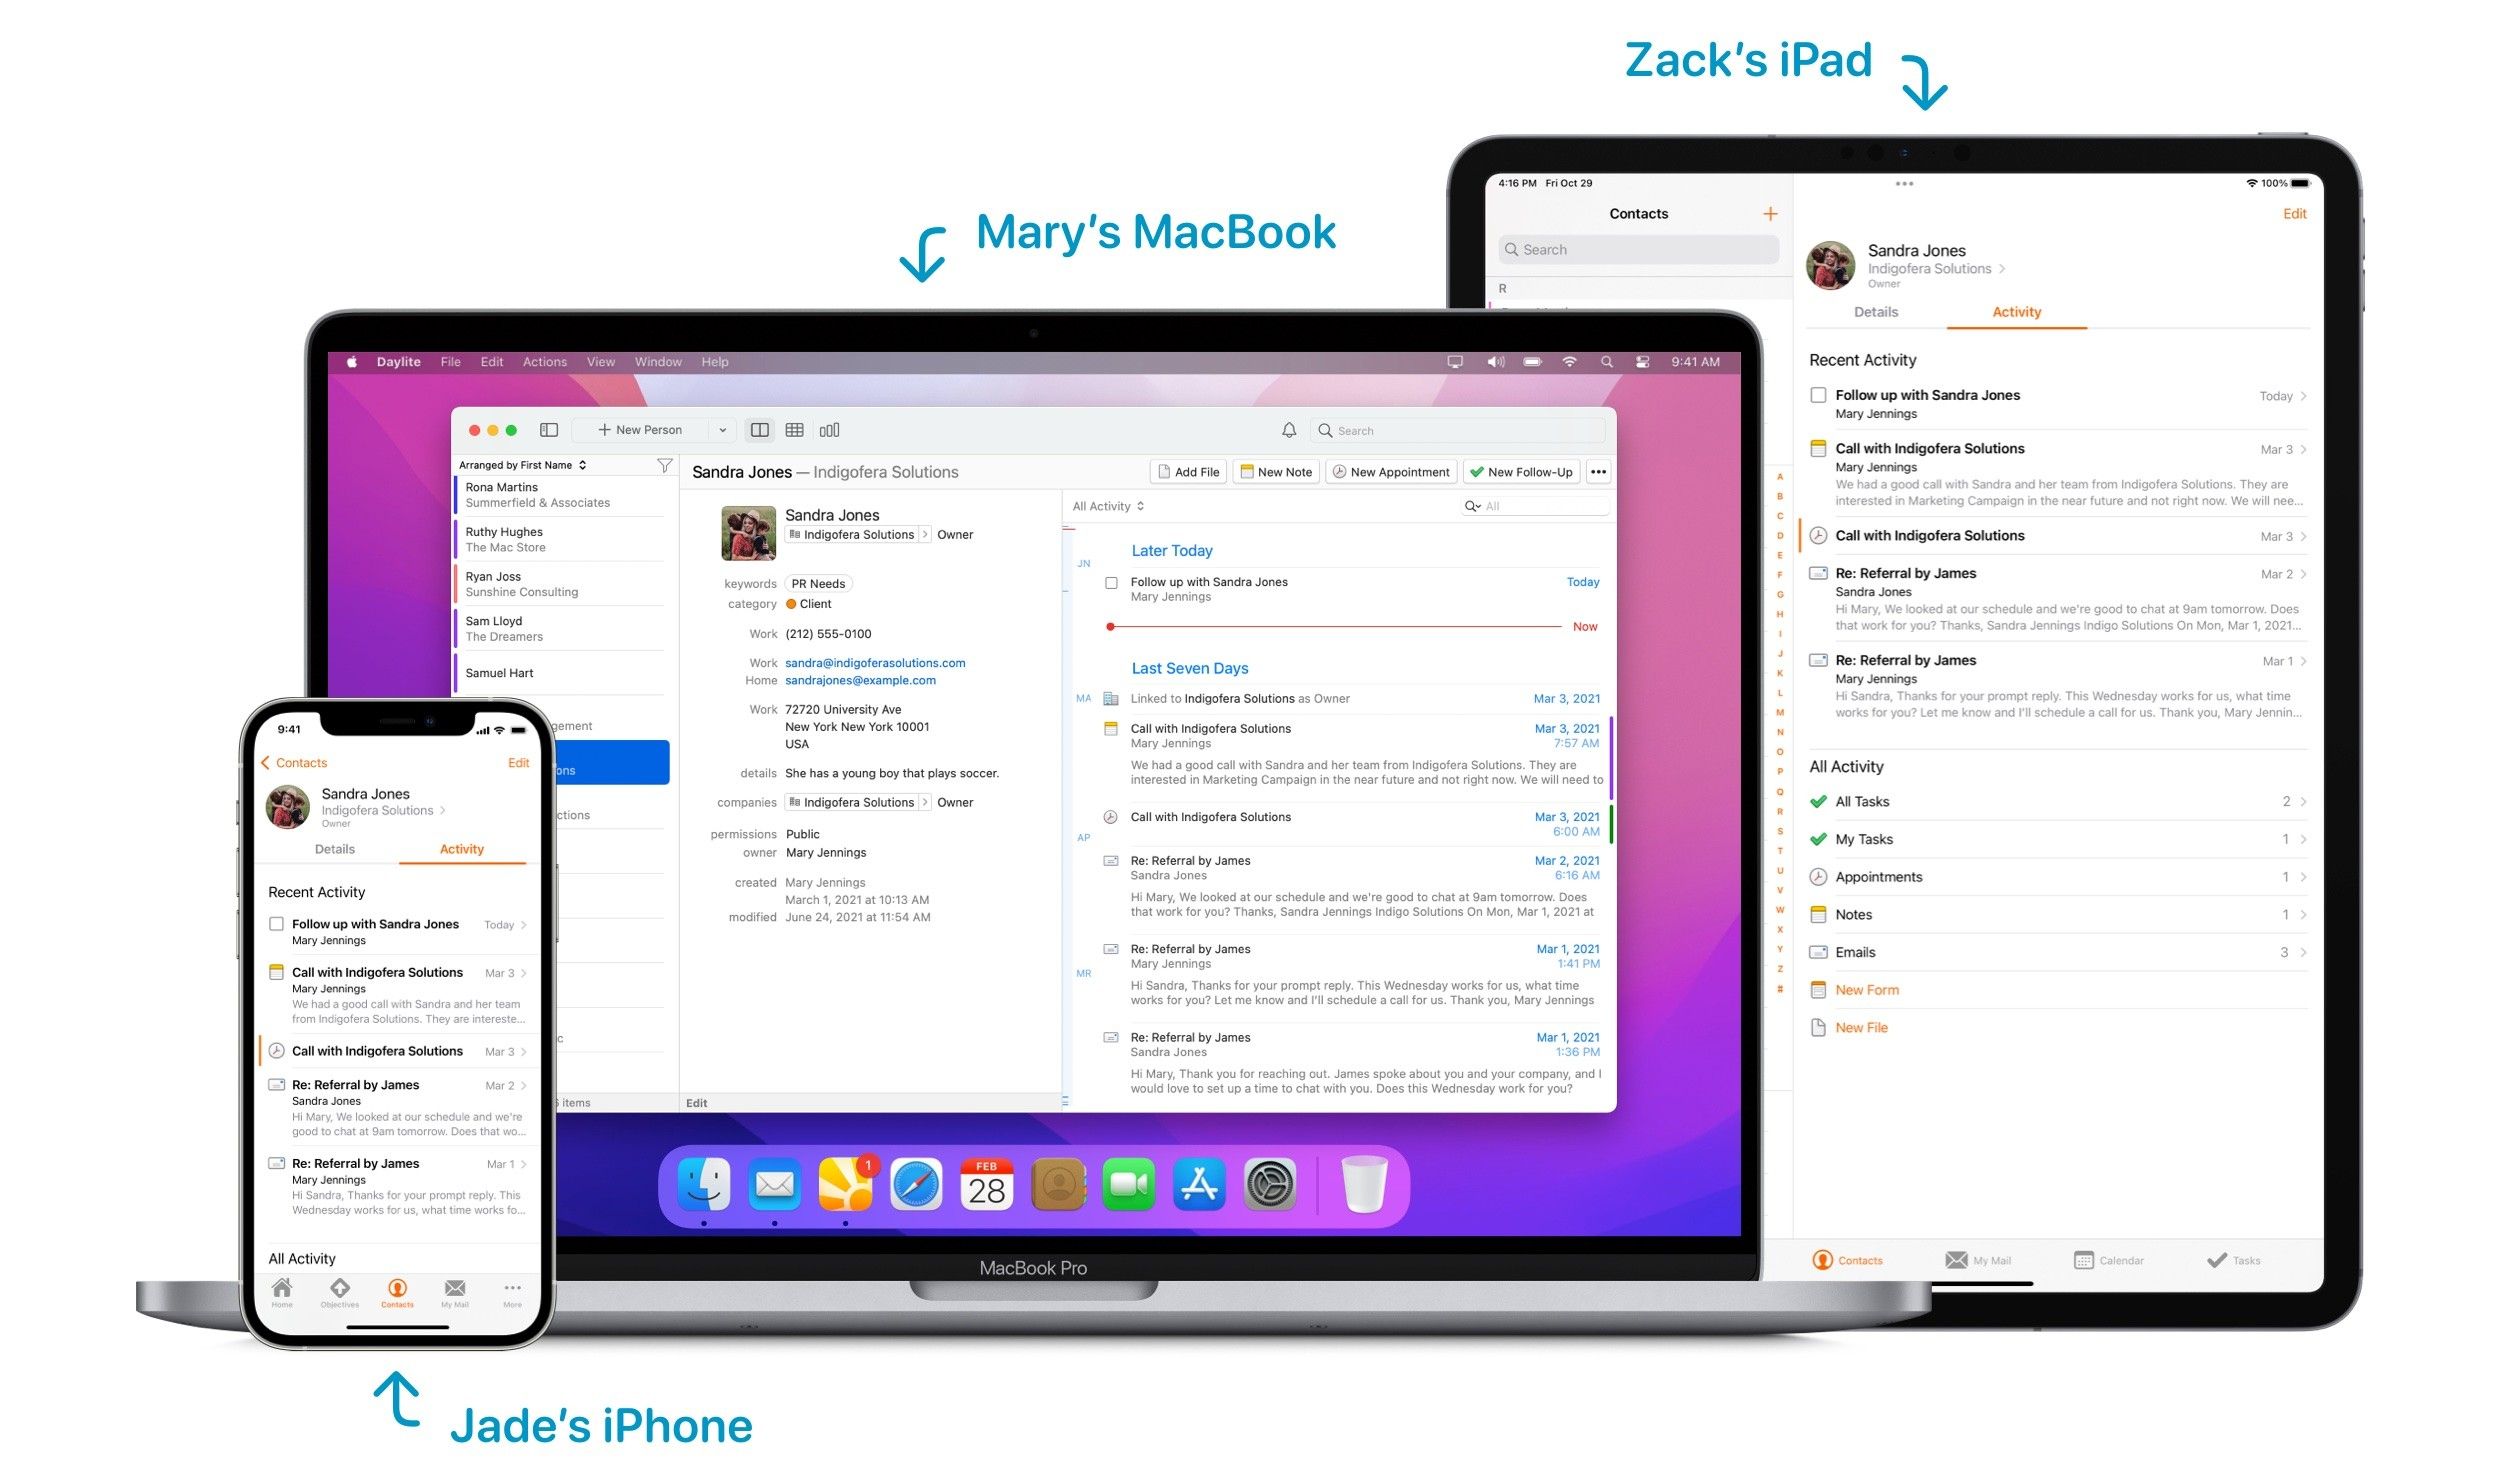 Daylite CRM on different Apple devices: Robin Bailey and his team at Aria Benefits use of Daylite to share communications and collaborate efficiently across Apple devices.